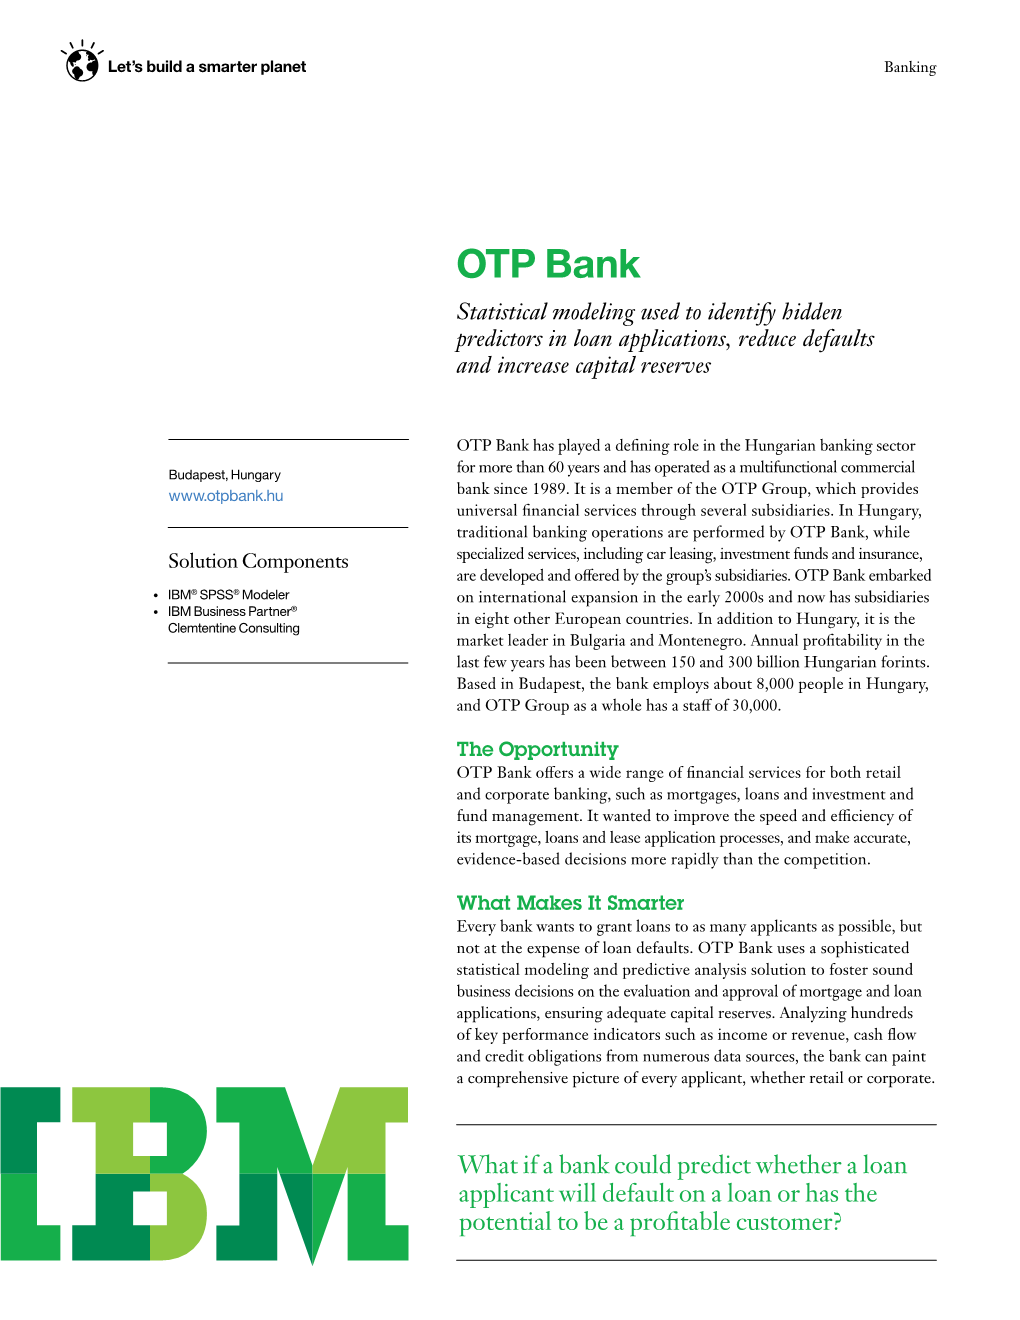 OTP Bank Statistical Modeling Used to Identify Hidden Predictors in Loan Applications, Reduce Defaults and Increase Capital Reserves